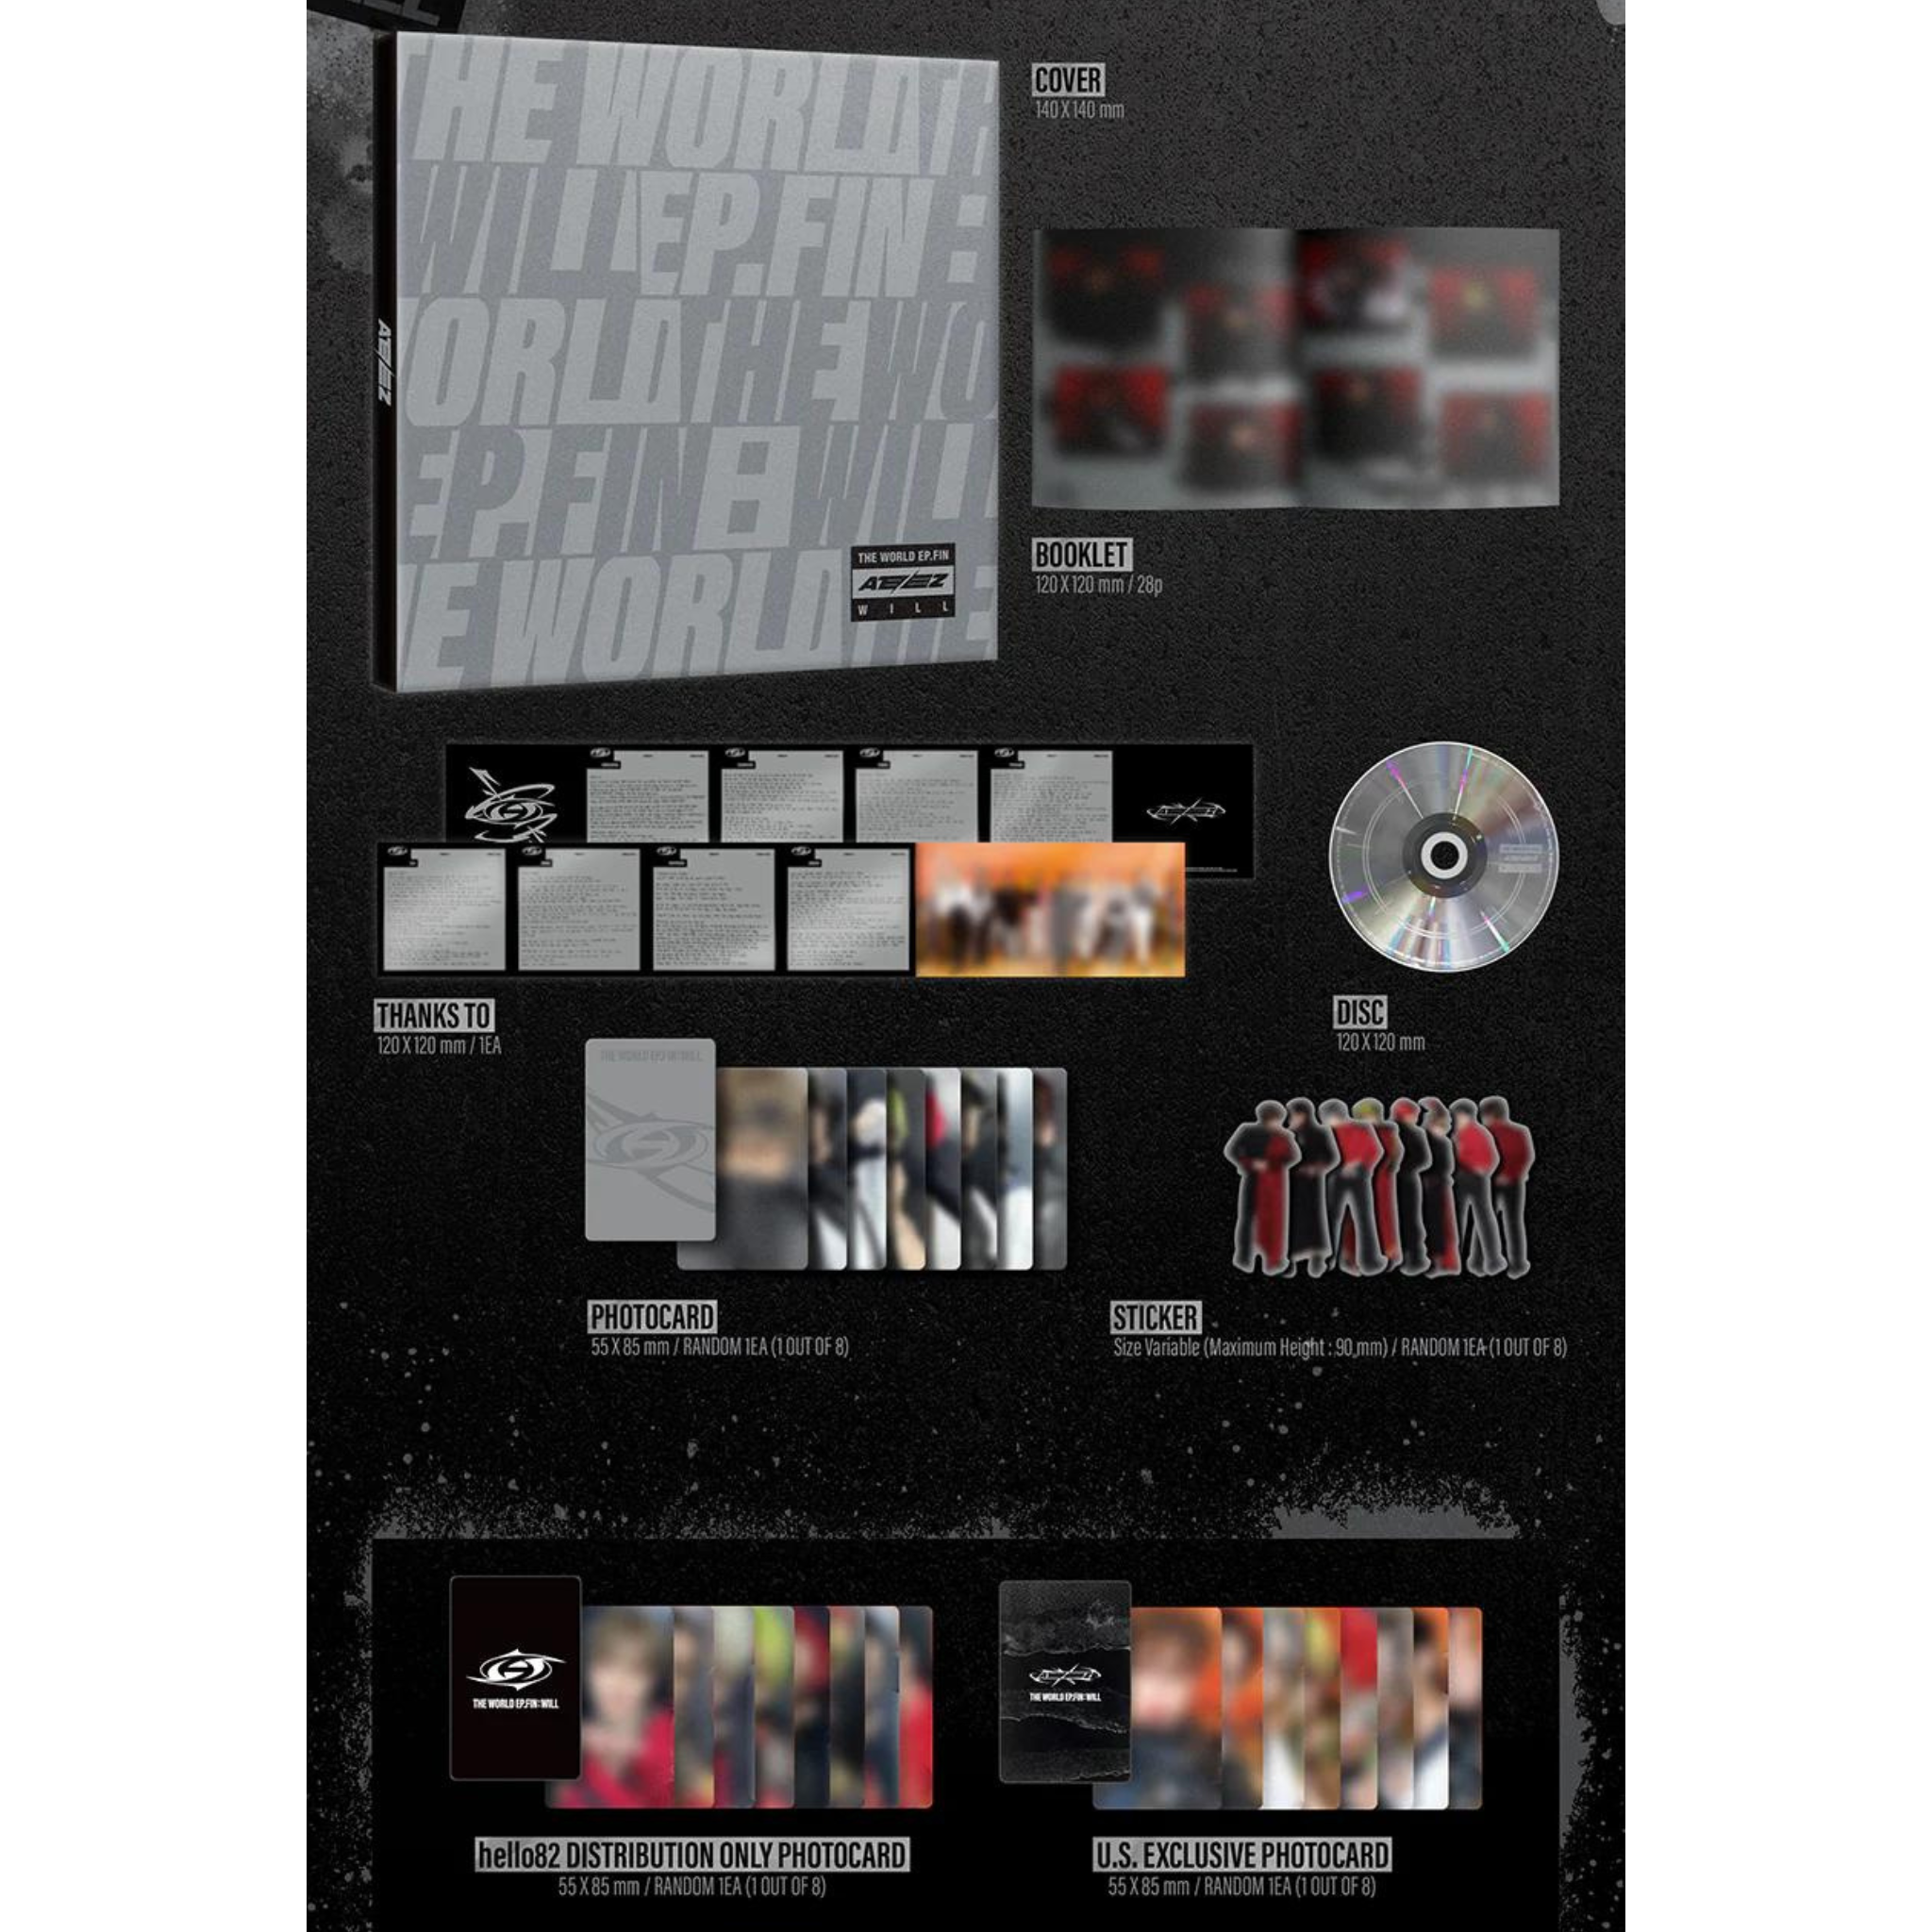 ATEEZ "The WORLD EP.FIN: WILL" (Digipack Ver.) [hello82 Exclusive]